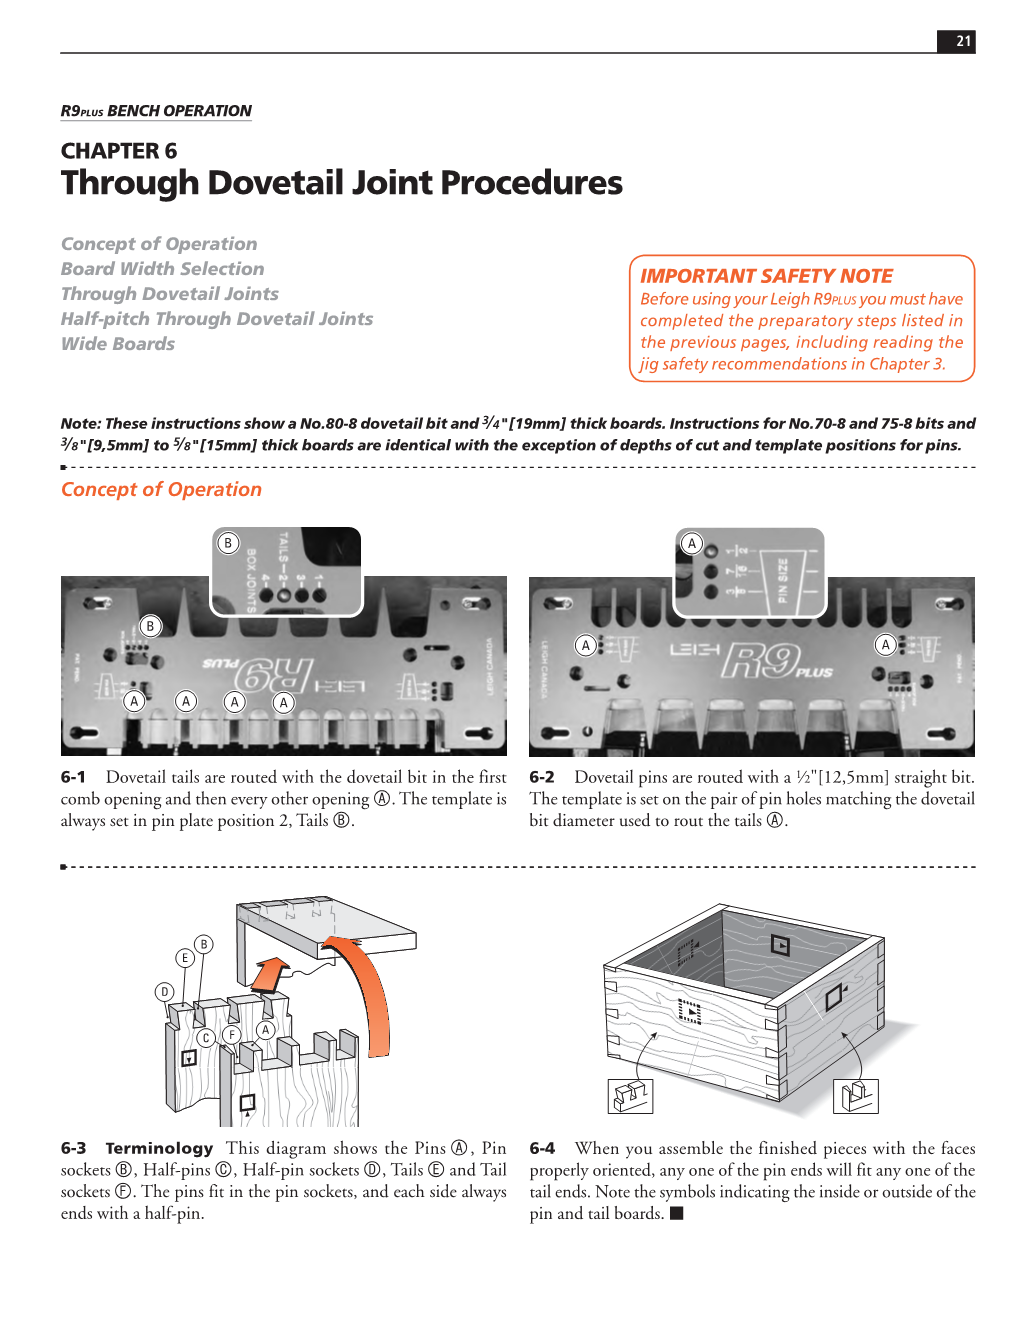 Through Dovetail Joint Procedures